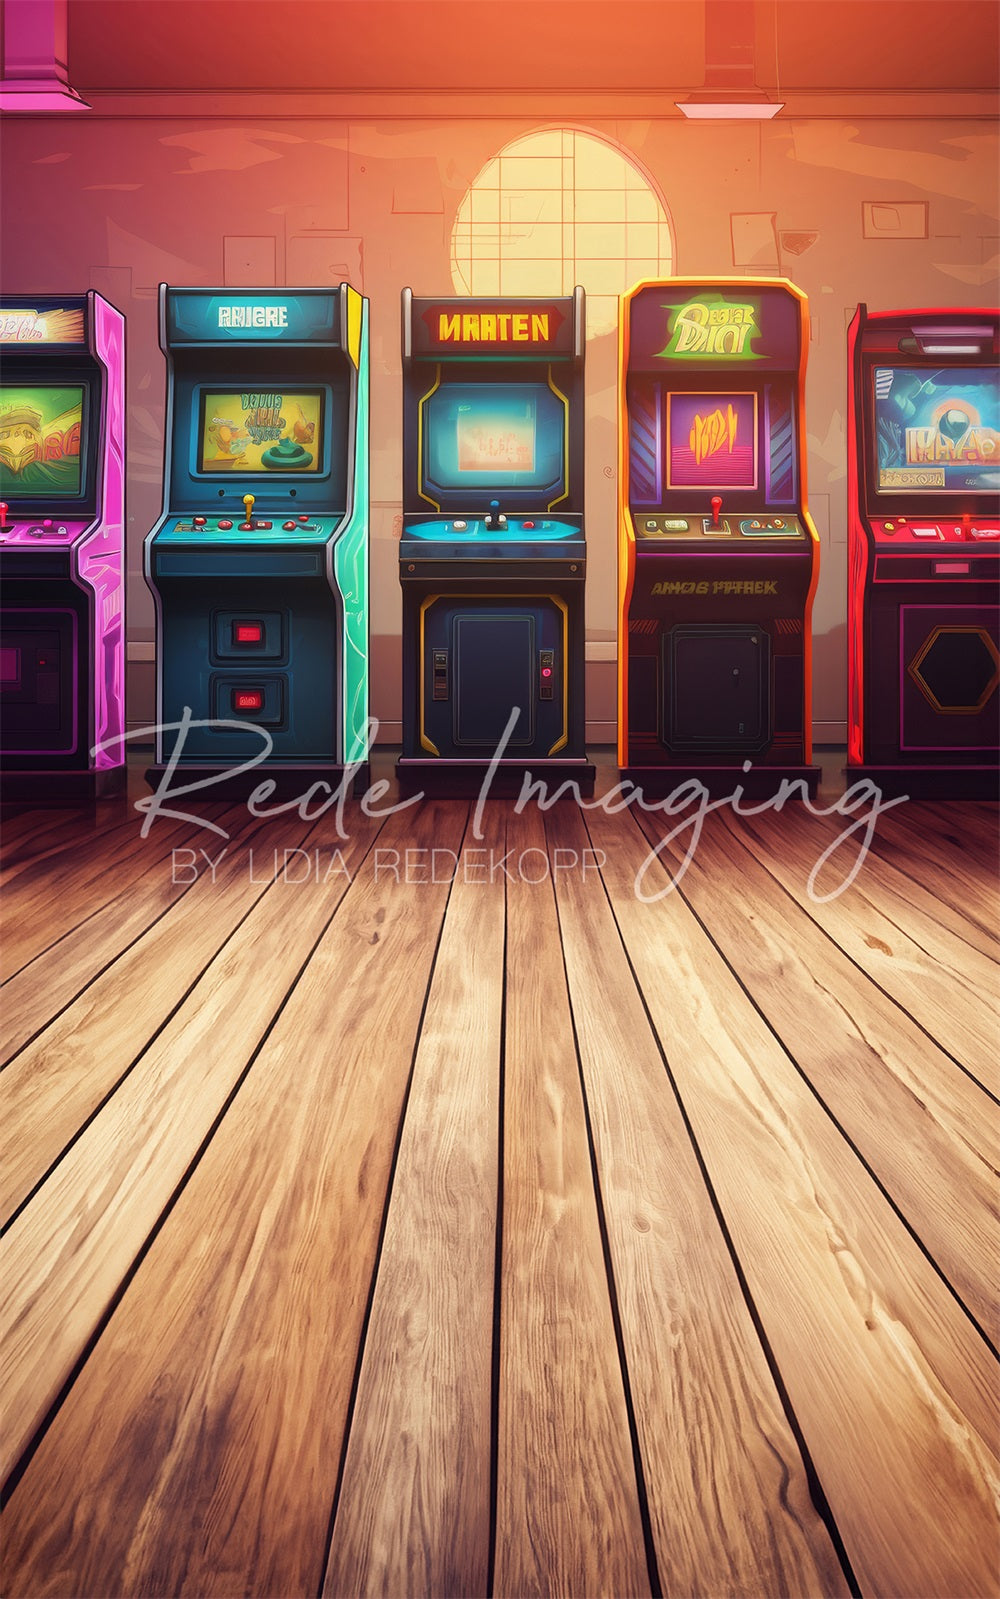 TEST kate Sweep Retro Cartoon Colorful Game Arcade Backdrop Designed by Lidia Redekopp